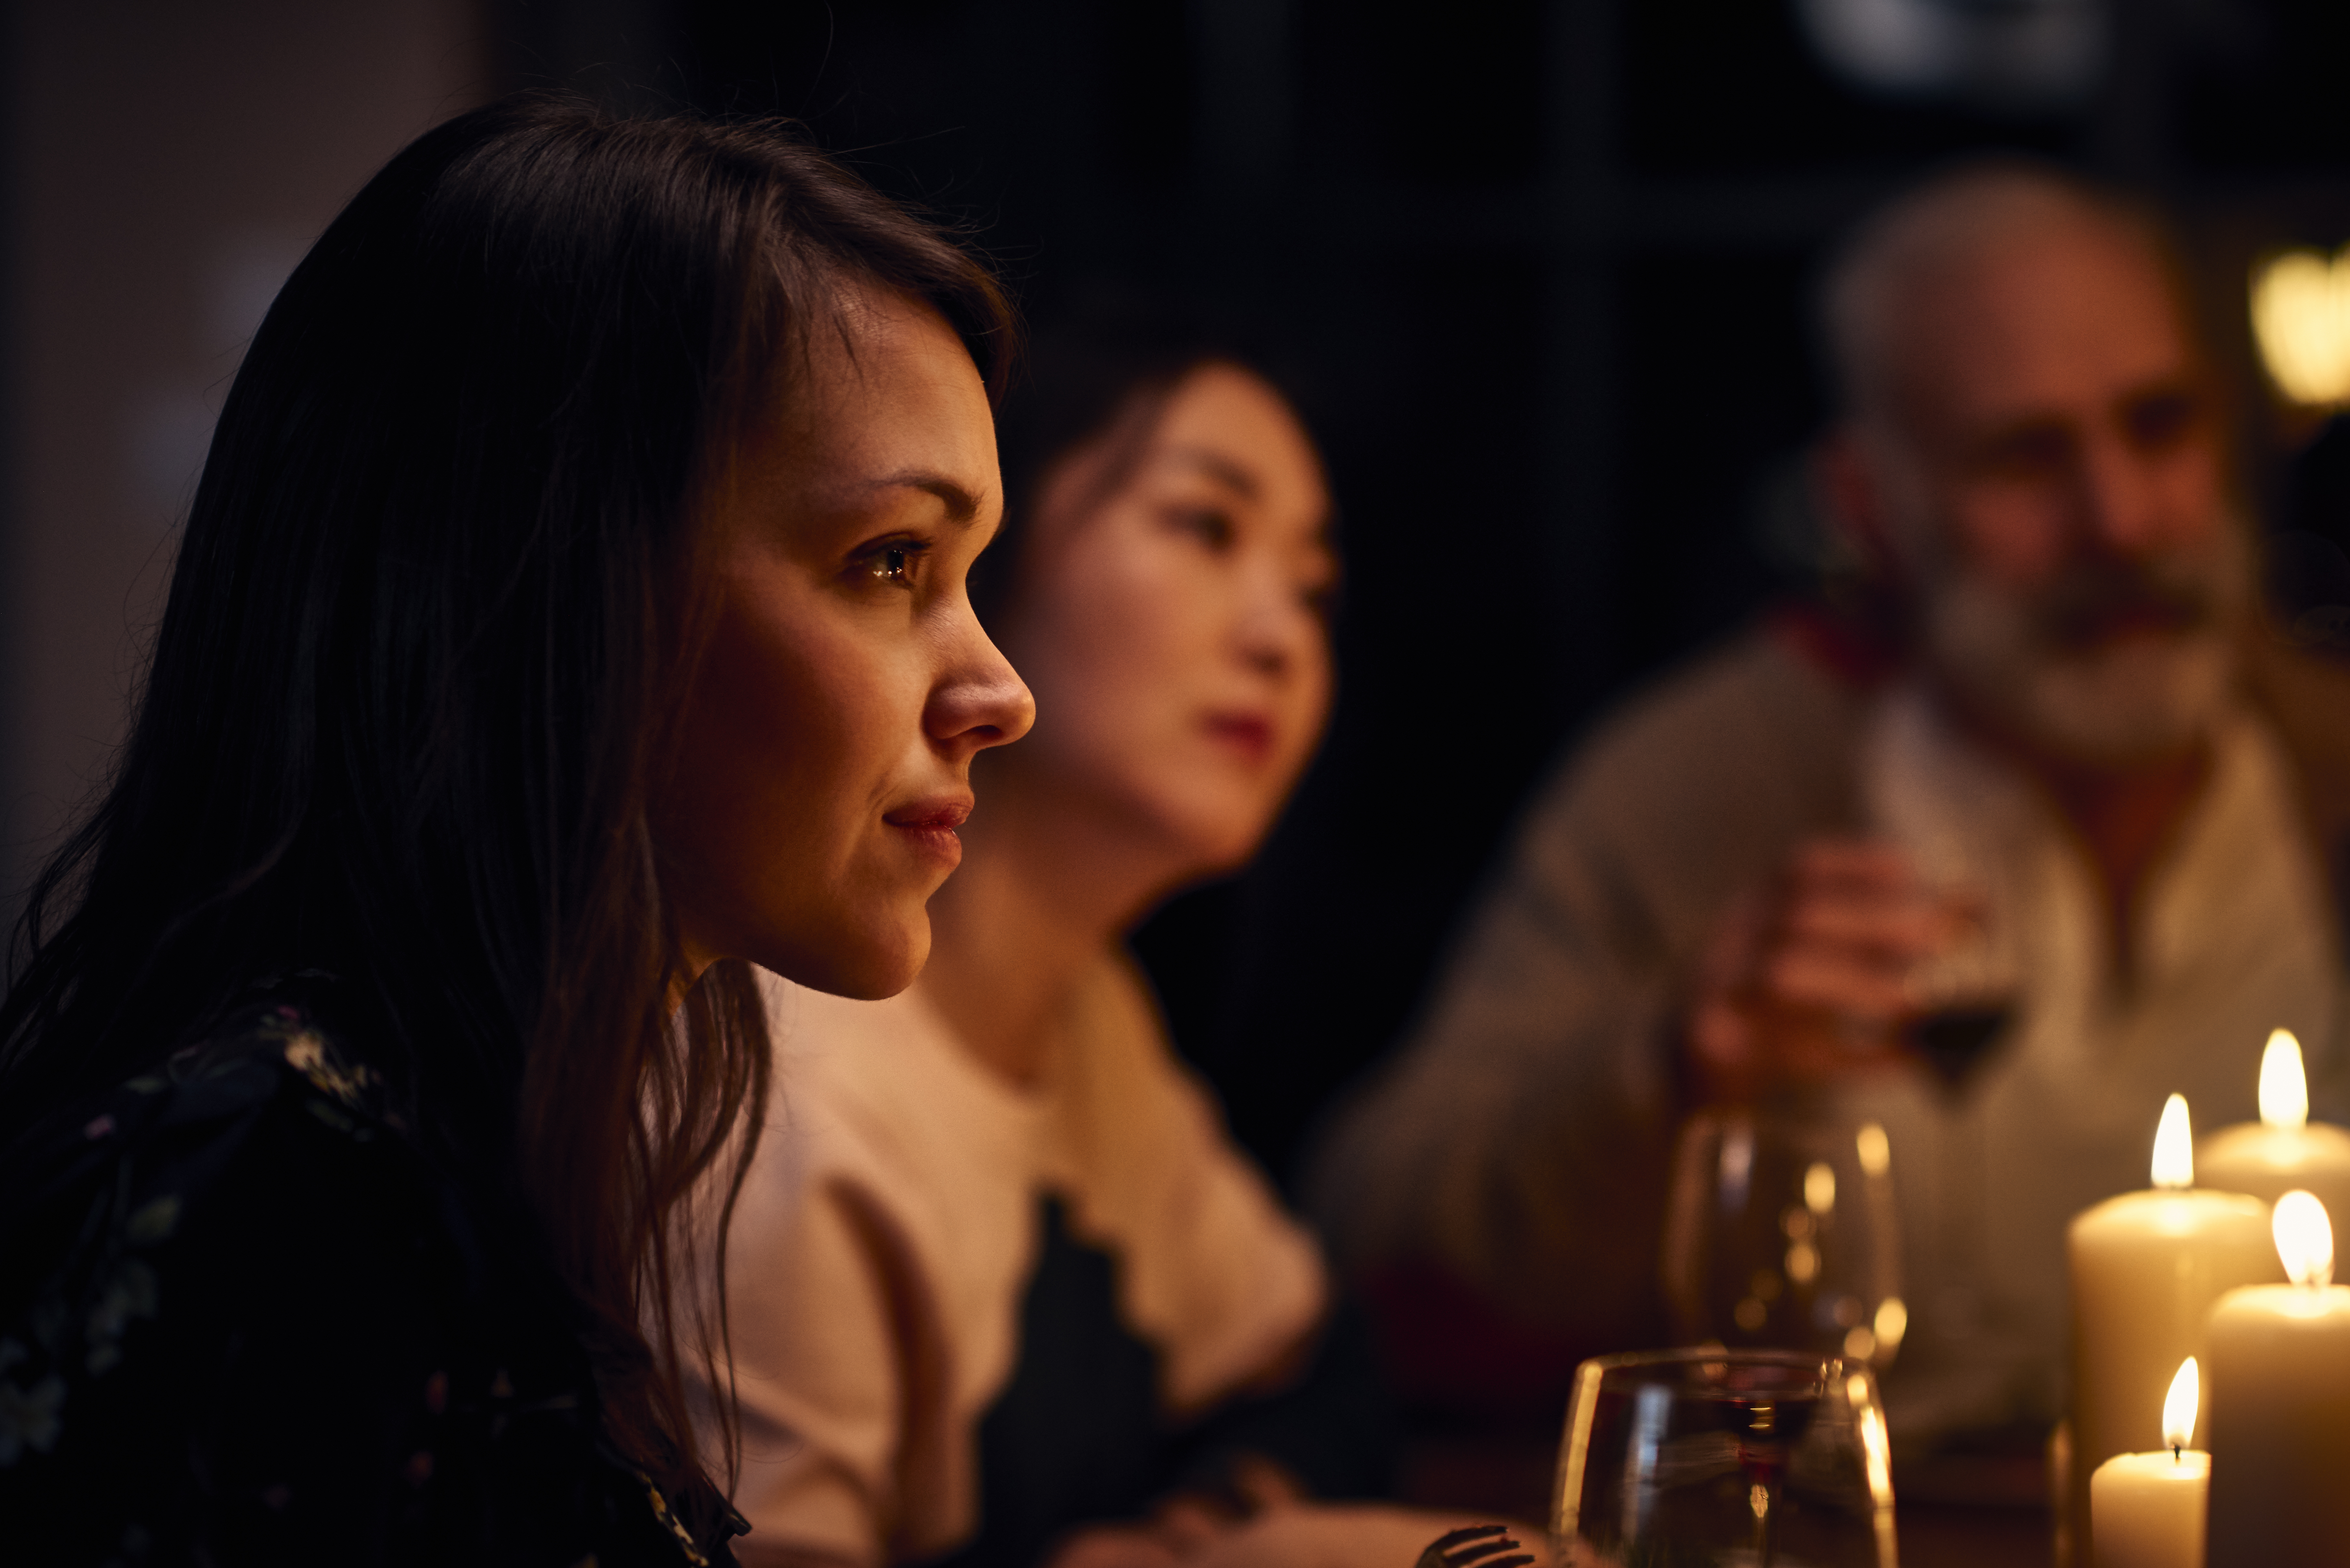 Serene looking woman at dinner party listening attentively | Source: Getty Images